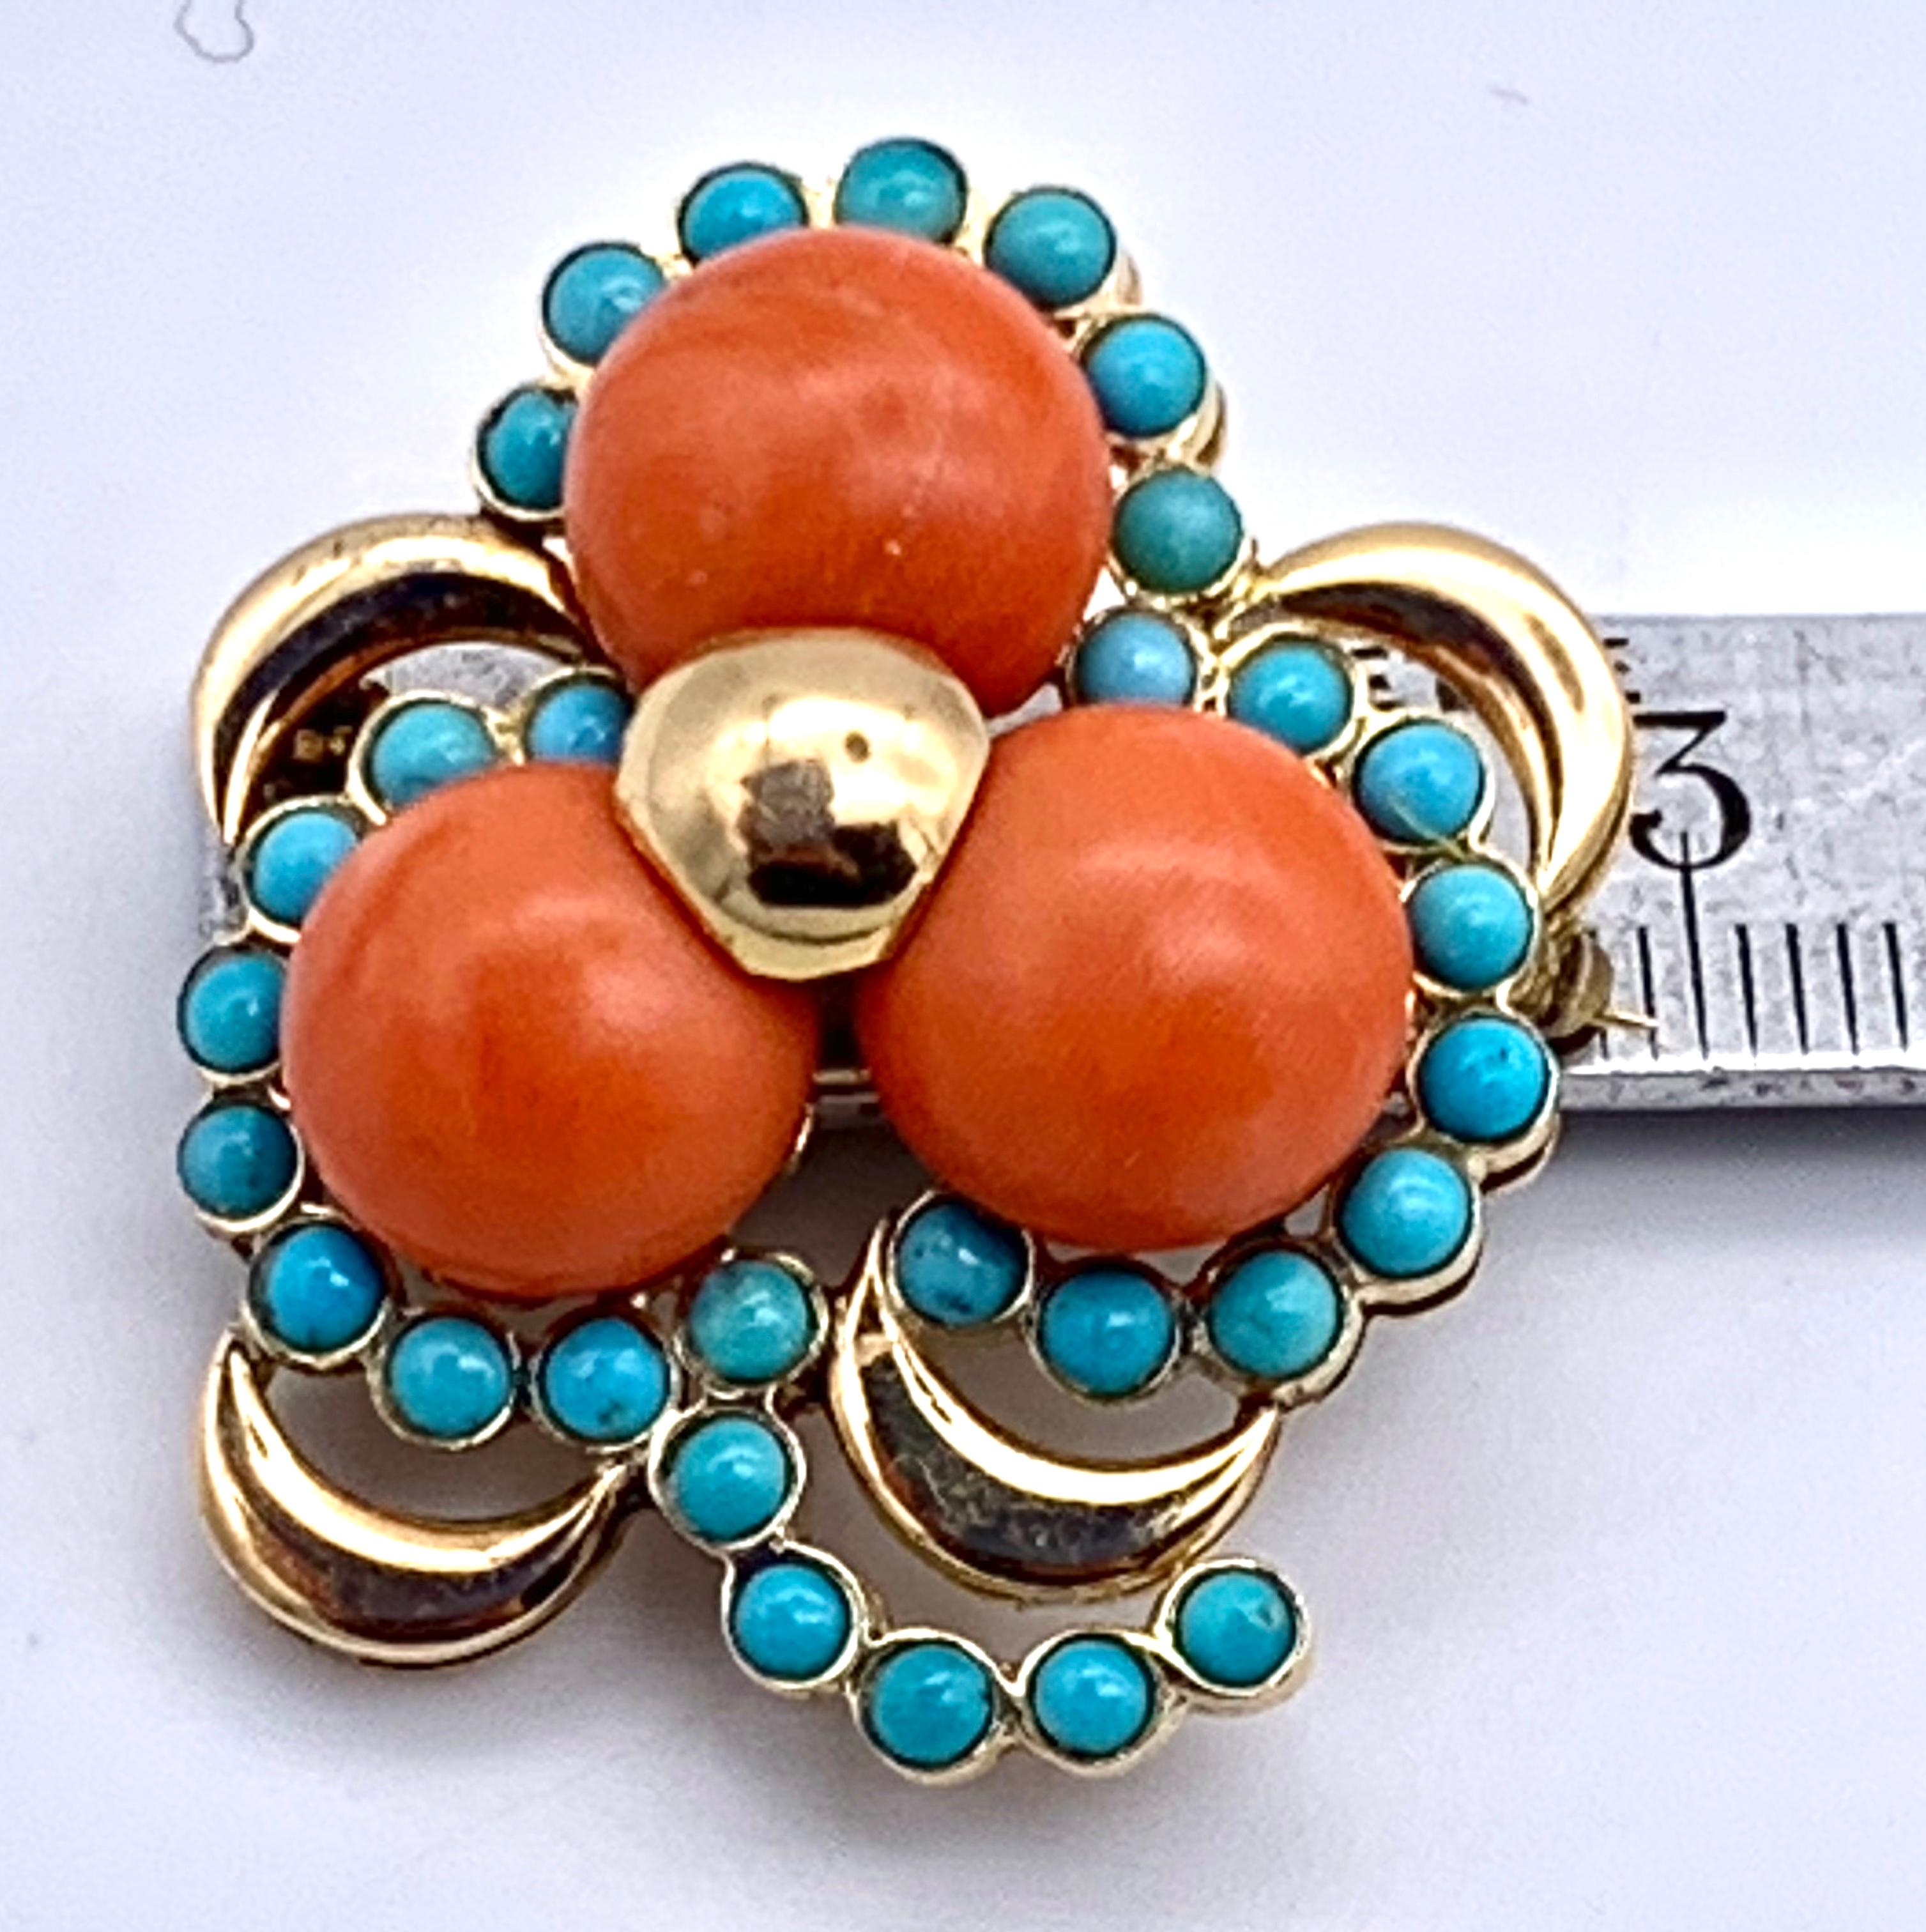 Wonderful chunky brooch in the shape of a three leaf clover made out of 14k gold, button coral and turquoise.